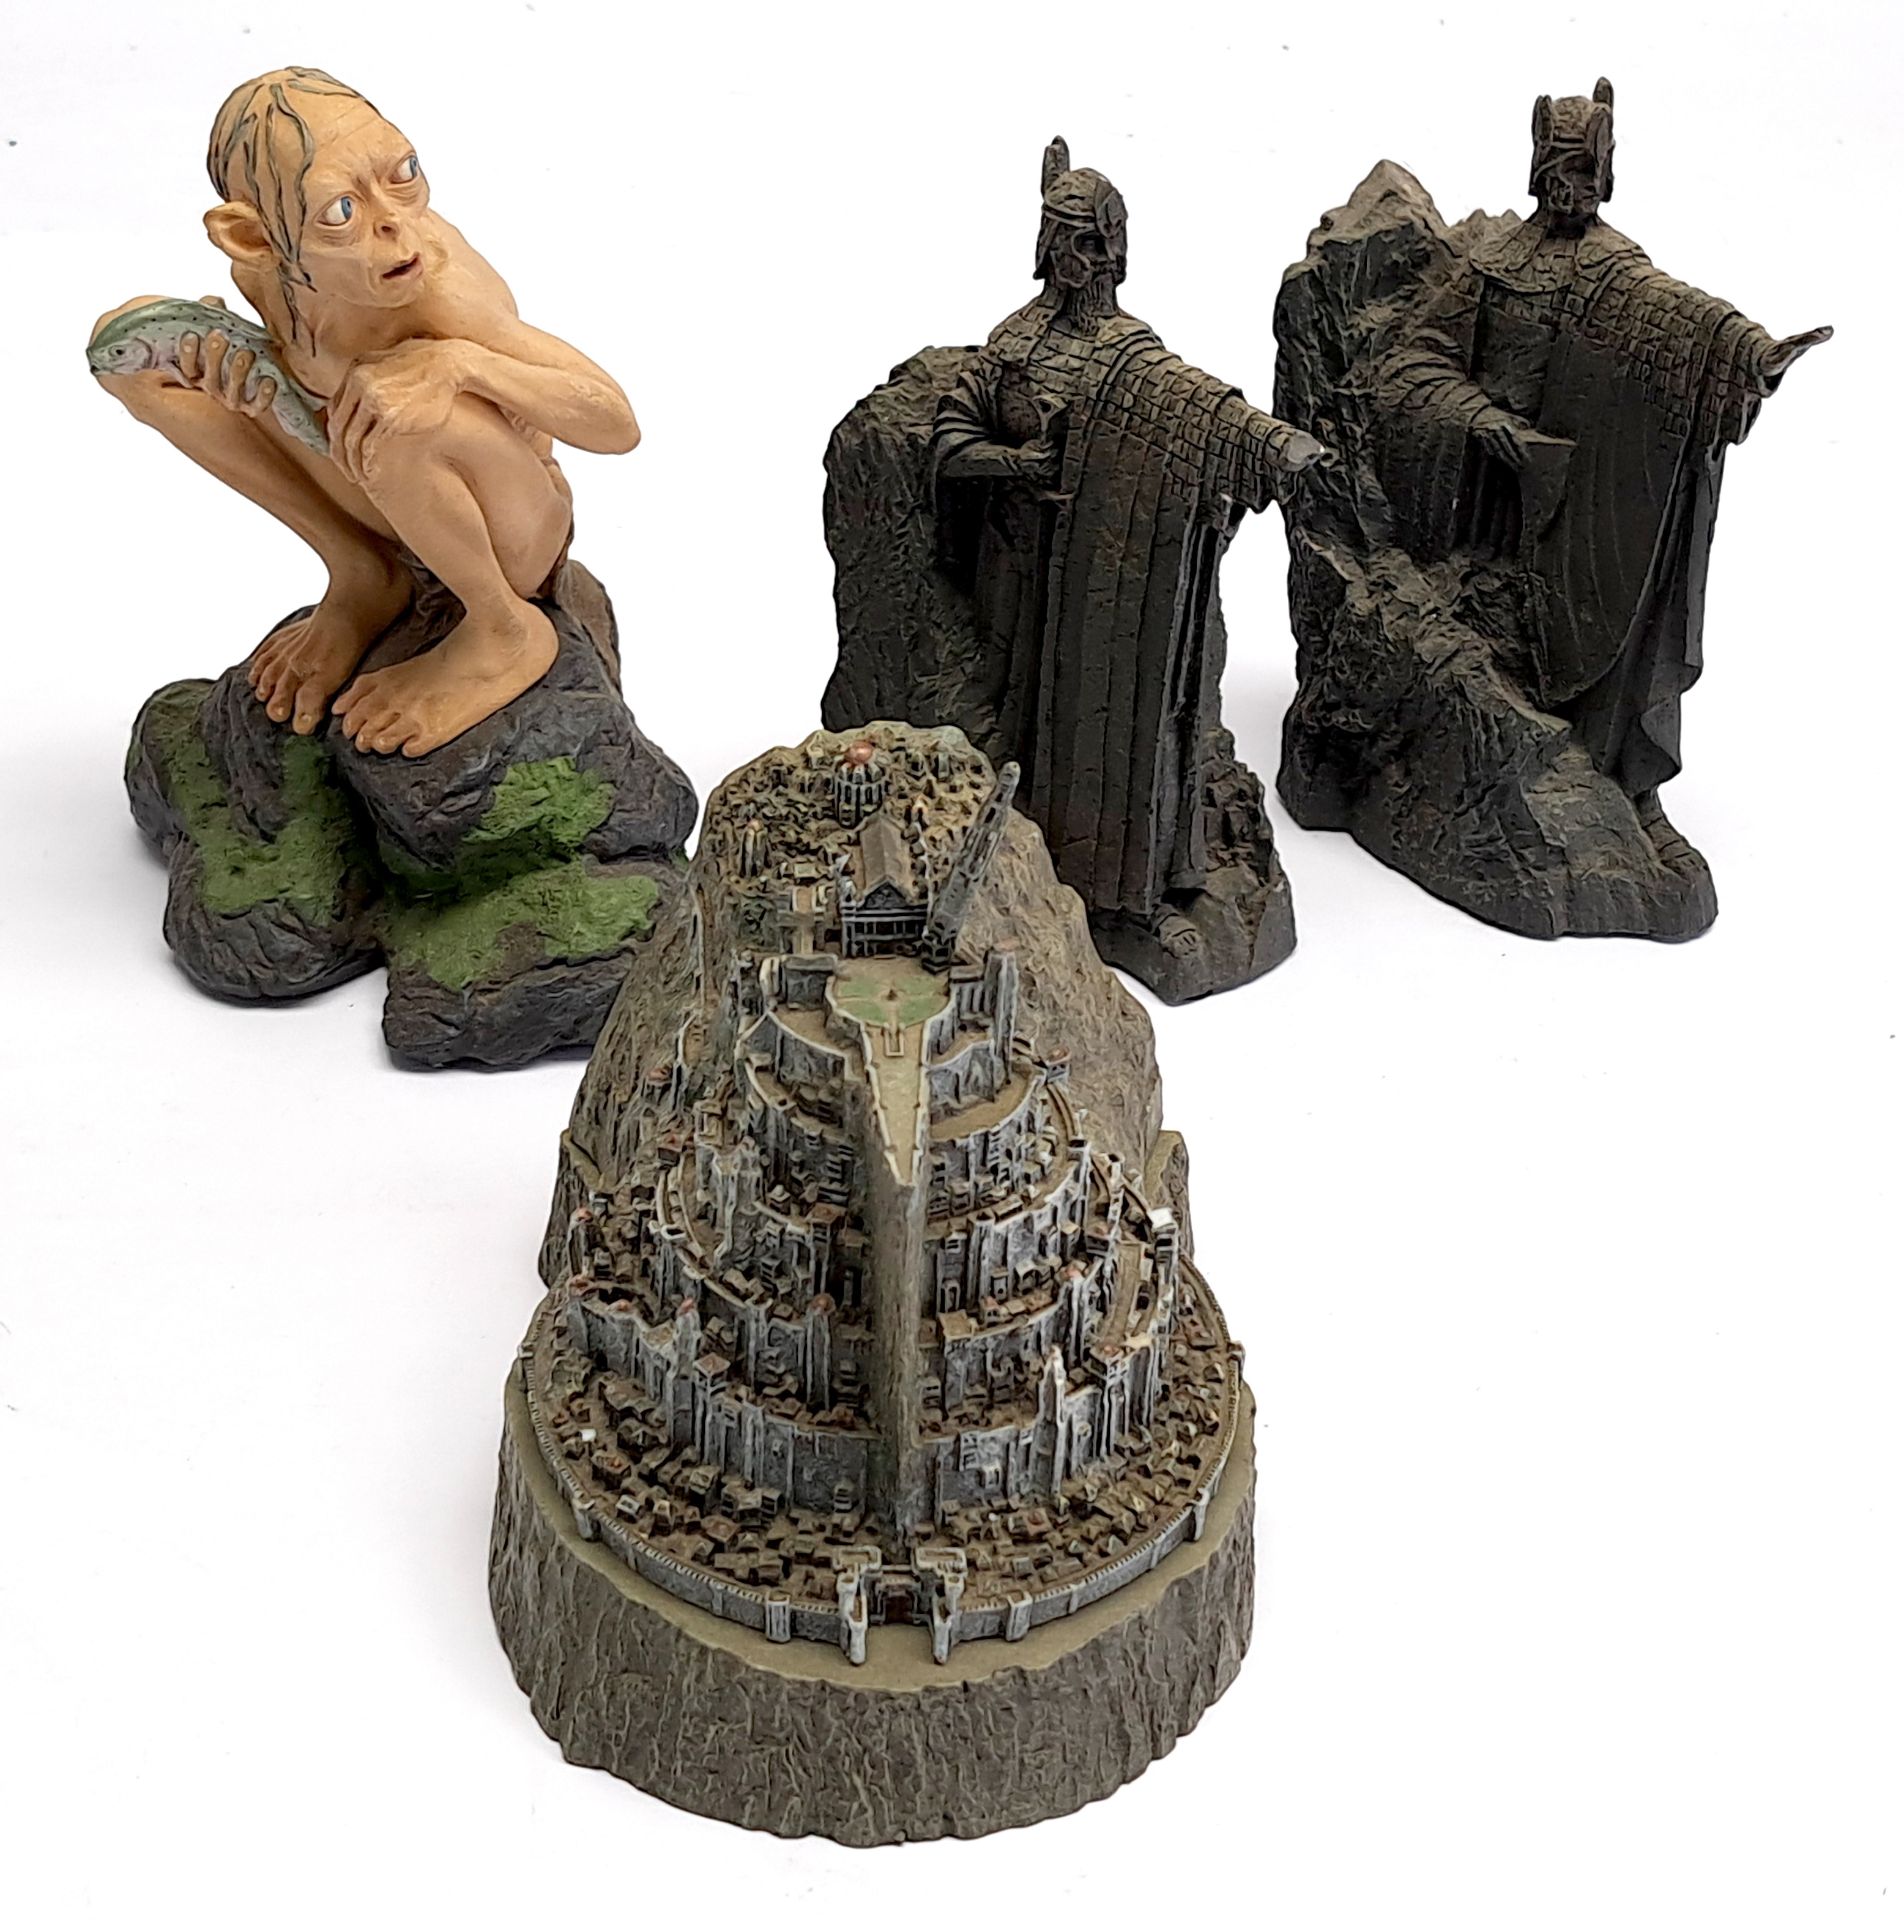 Sideshow Weta, The Lord of the Rings DVD Exclusive collectable statues